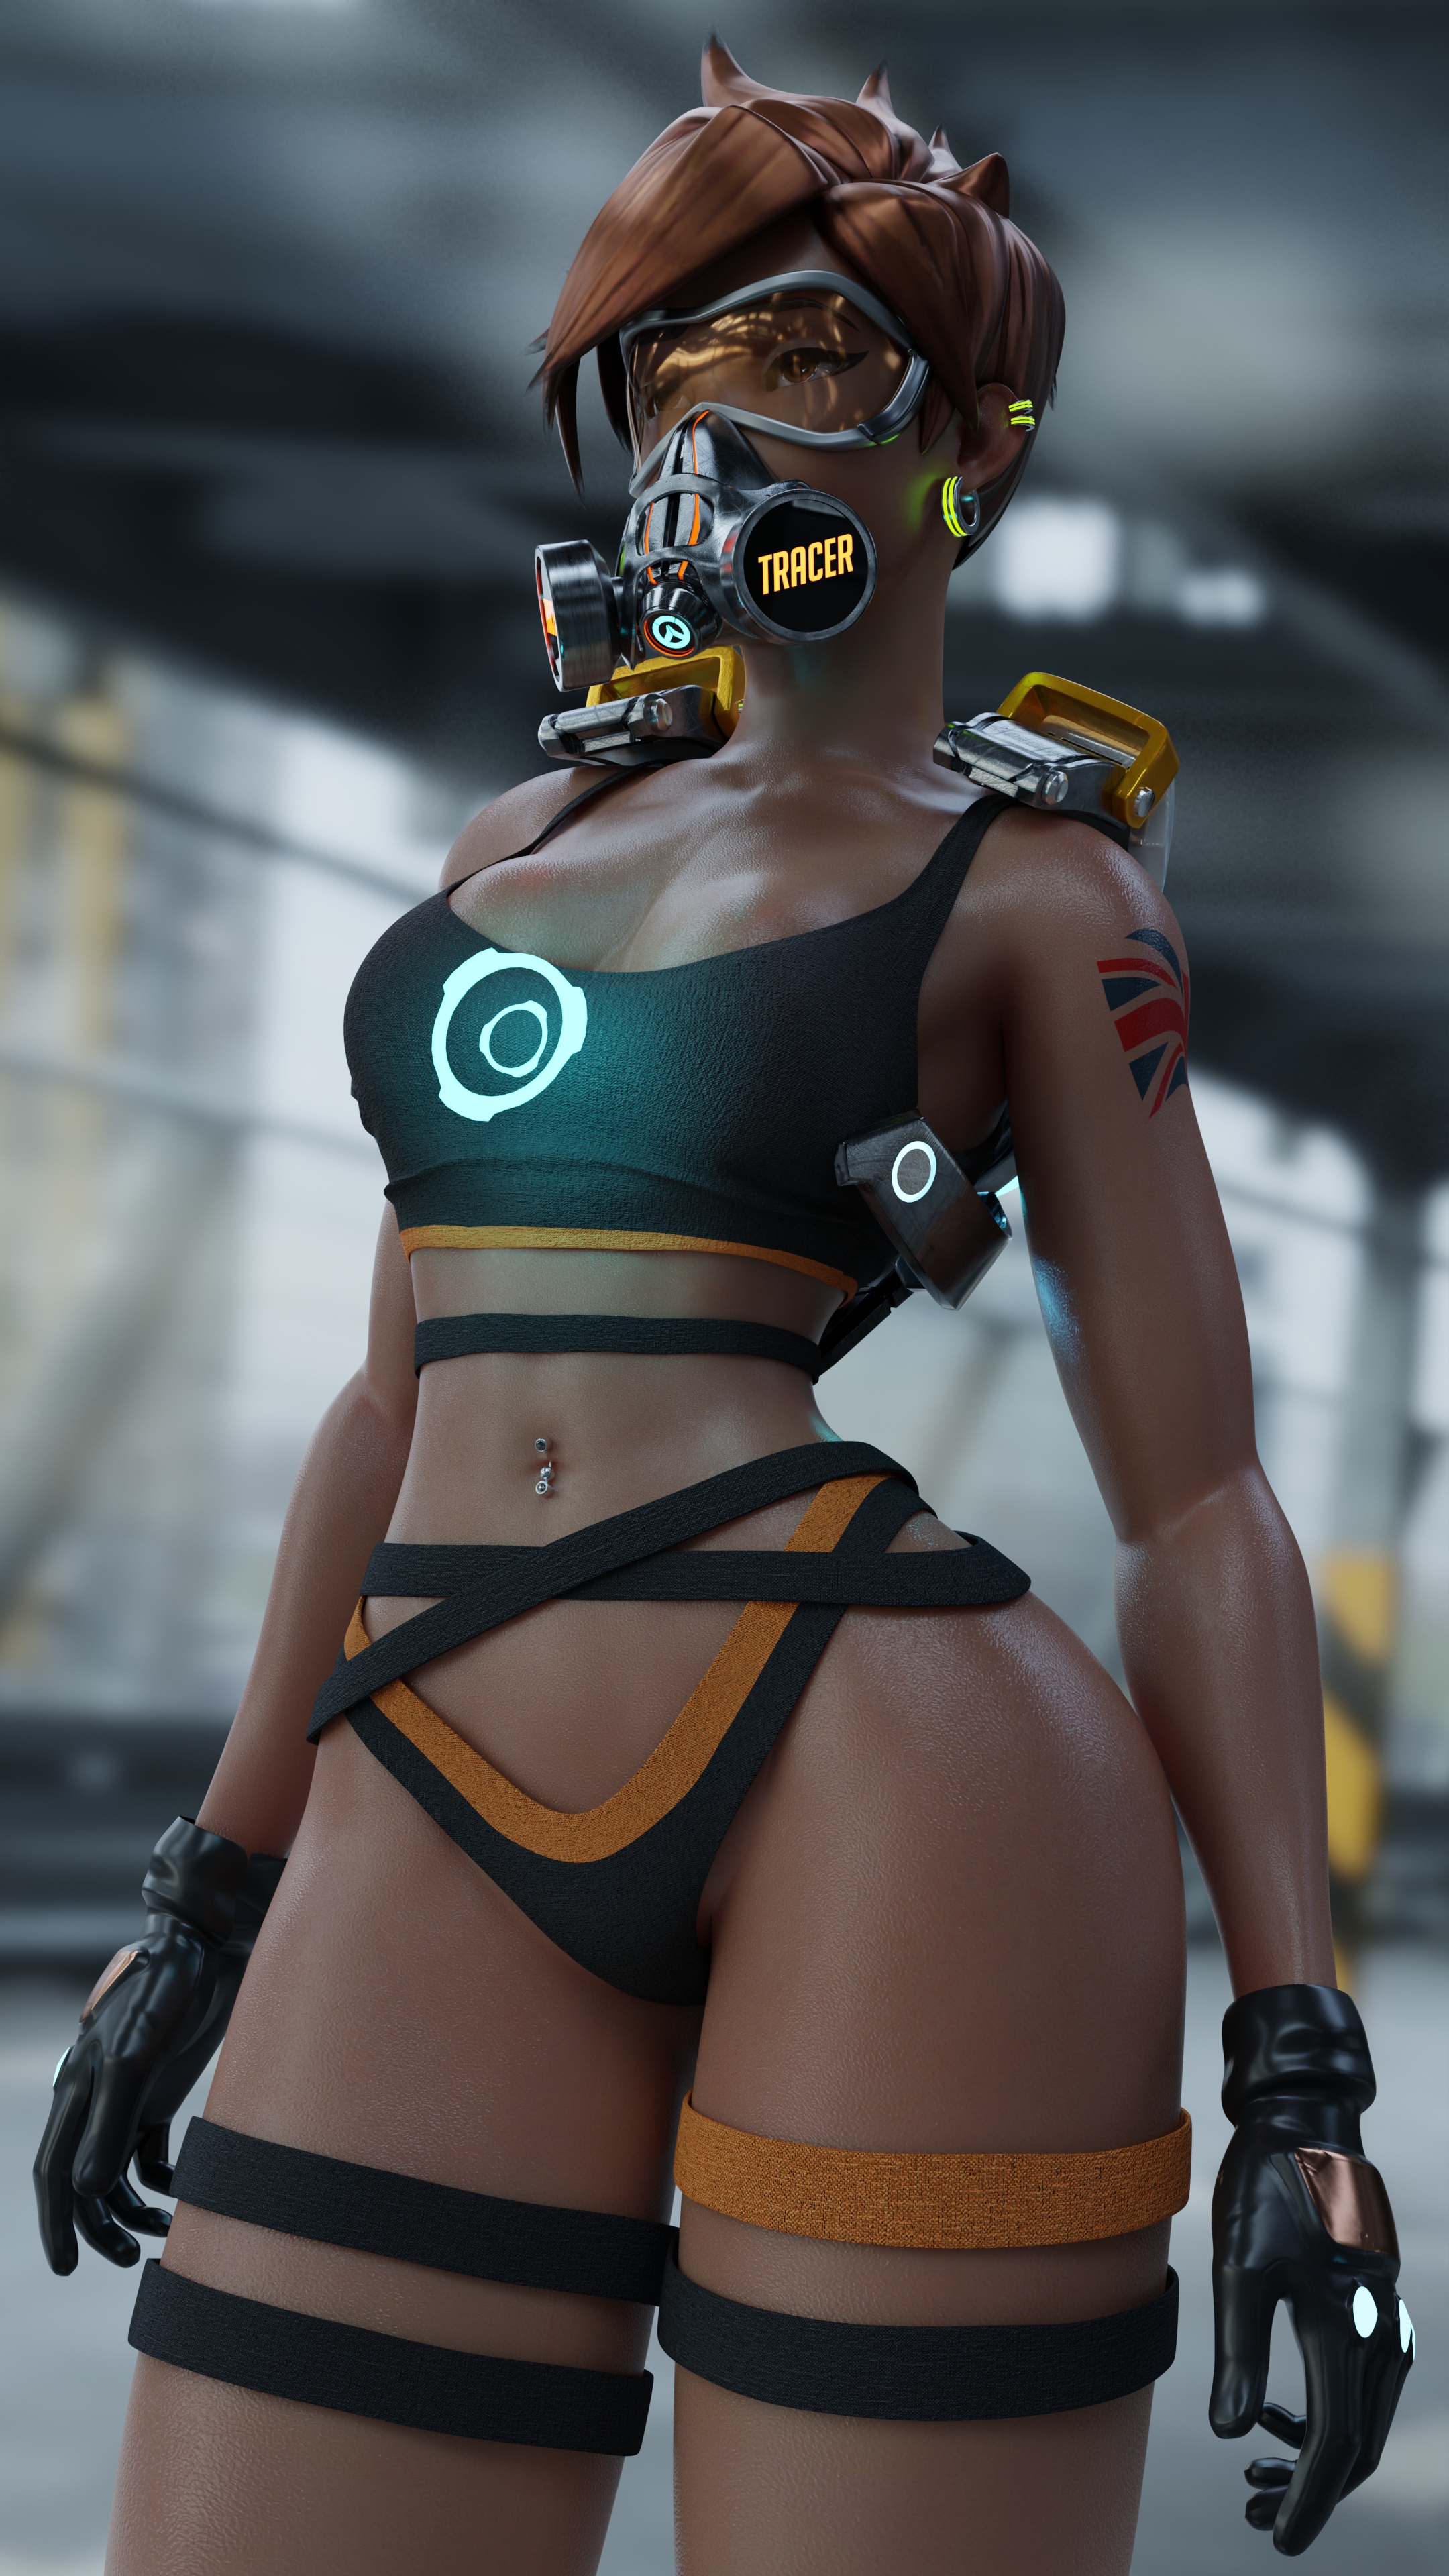 She could trace me anytime 😏 Tracer Overwatch 3d Porn Sexy Sfw Big Booty Perfect Body Outfit 3d Girl Brunette Piercing Gas Mask Fit Posing 2